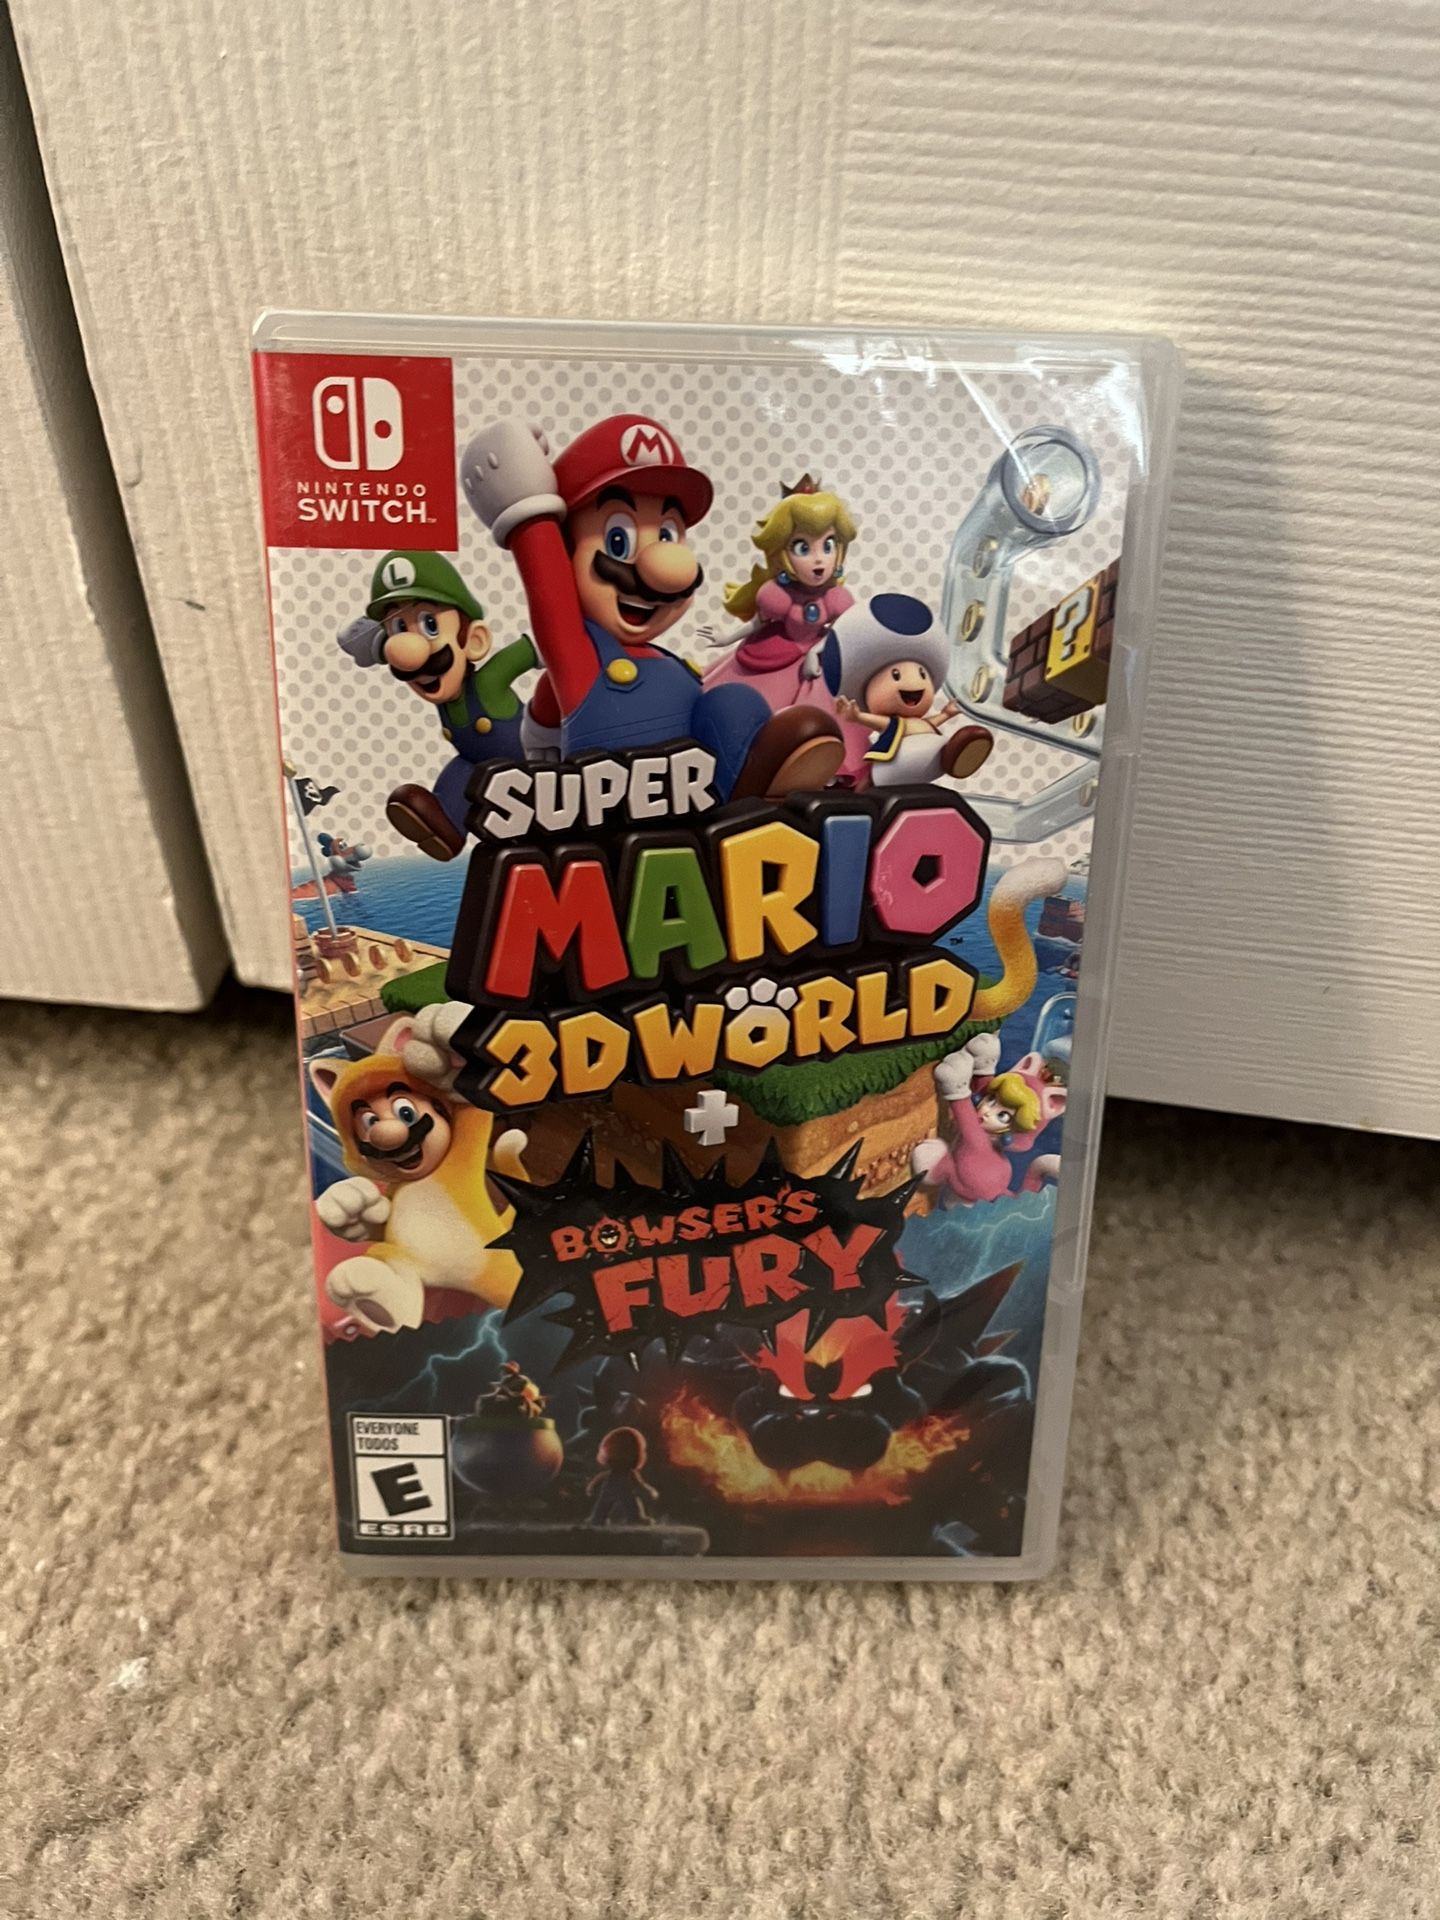 Super Mario 3D World Bowsers Fury for Nintendo Switch ***BRAND NEW SEALED***